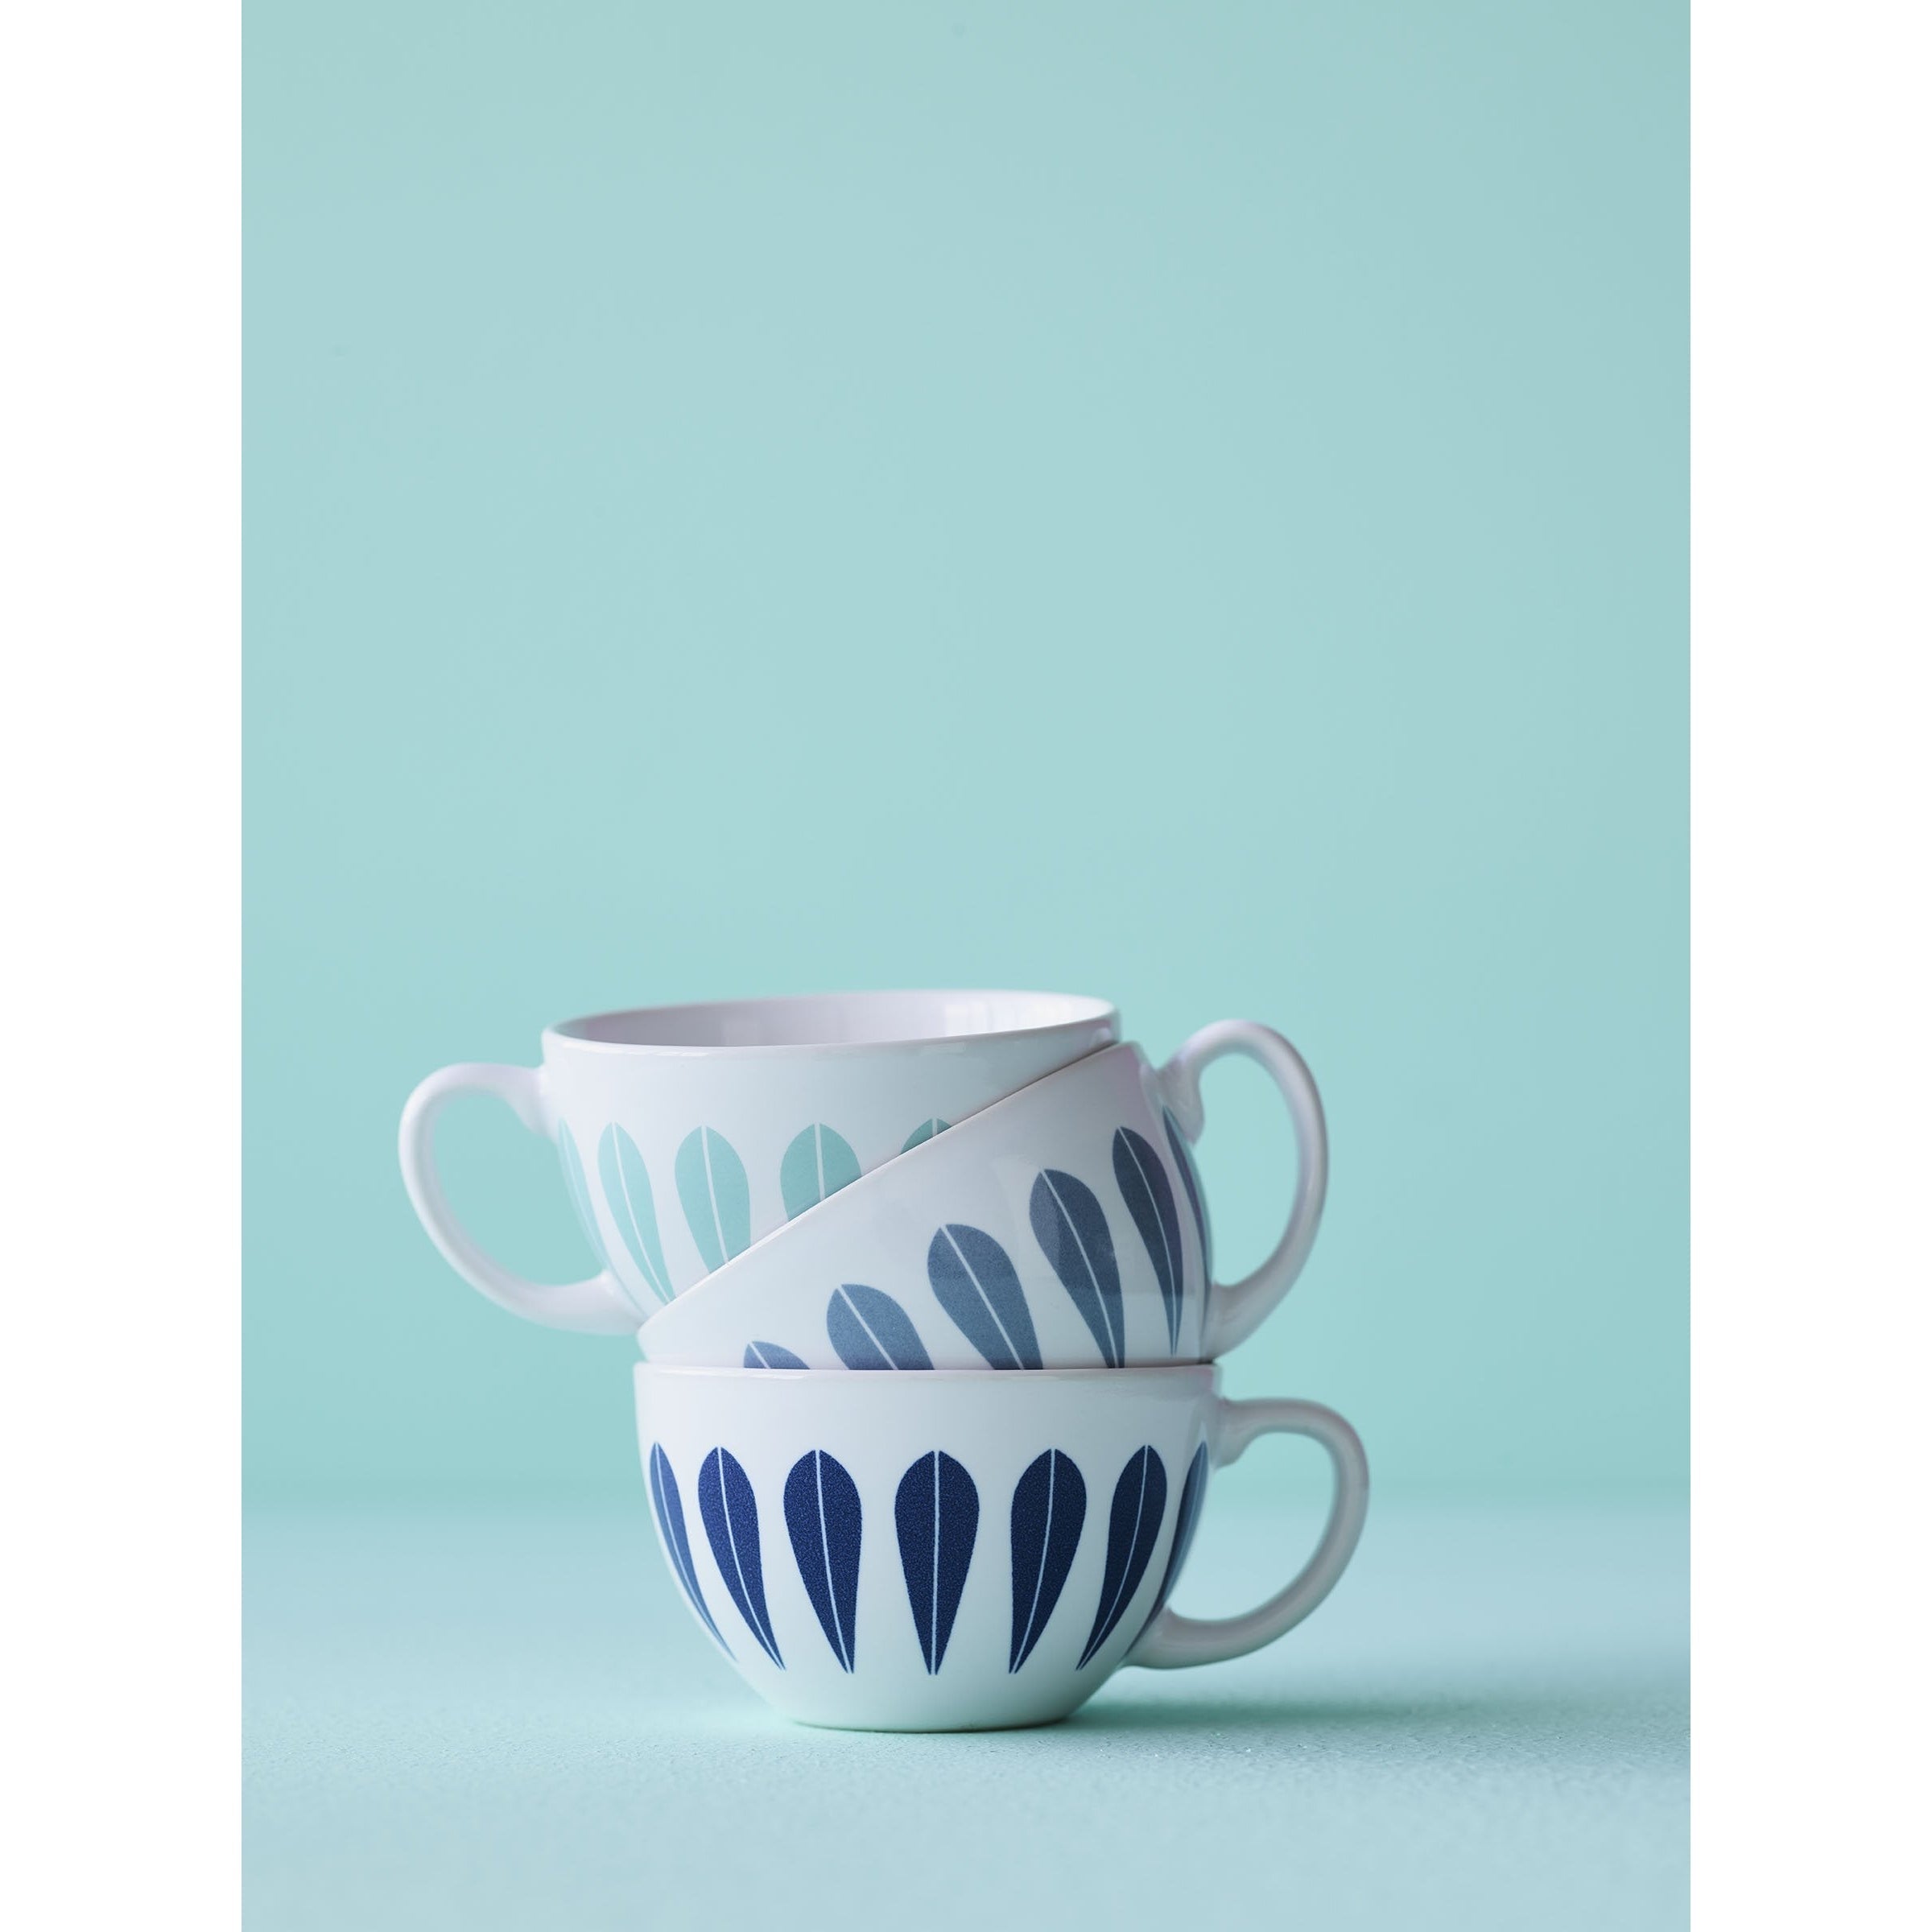 Lucie Kaas Arne Clausen Collection Cups W. Saucer Blue oscuro, 10 cm